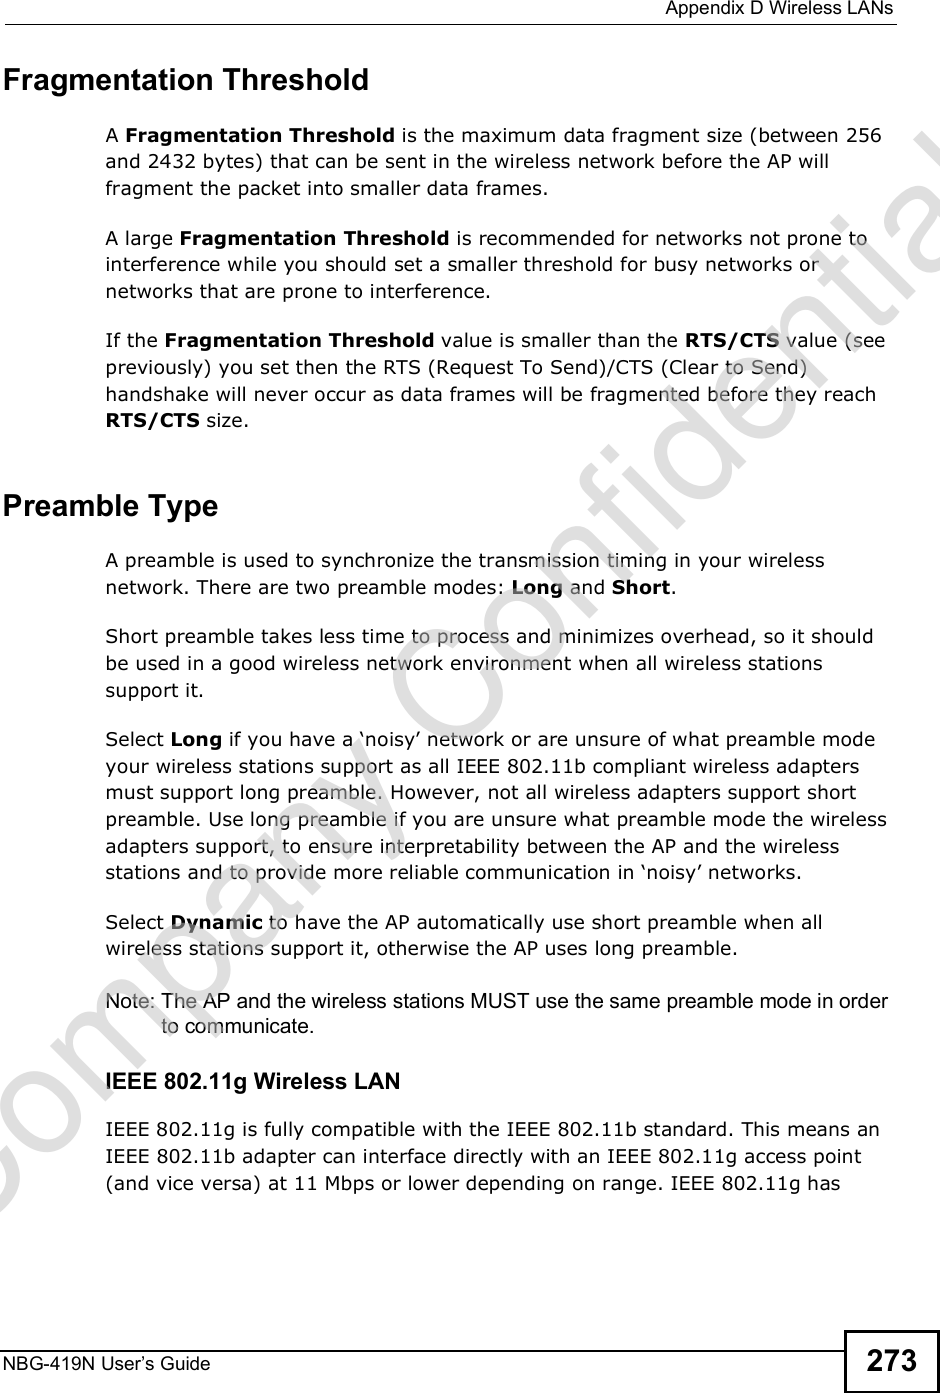  Appendix DWireless LANsNBG-419N User s Guide 273Fragmentation ThresholdA Fragmentation Threshold is the maximum data fragment size (between 256 and 2432 bytes) that can be sent in the wireless network before the AP will fragment the packet into smaller data frames.A large Fragmentation Threshold is recommended for networks not prone to interference while you should set a smaller threshold for busy networks or networks that are prone to interference.If the Fragmentation Threshold value is smaller than the RTS/CTS value (see previously) you set then the RTS (Request To Send)/CTS (Clear to Send) handshake will never occur as data frames will be fragmented before they reach RTS/CTS size.Preamble TypeA preamble is used to synchronize the transmission timing in your wireless network. There are two preamble modes: Long and Short. Short preamble takes less time to process and minimizes overhead, so it should be used in a good wireless network environment when all wireless stations support it. Select Long if you have a &apos;noisy! network or are unsure of what preamble mode your wireless stations support as all IEEE 802.11b compliant wireless adapters must support long preamble. However, not all wireless adapters support short preamble. Use long preamble if you are unsure what preamble mode the wireless adapters support, to ensure interpretability between the AP and the wireless stations and to provide more reliable communication in &apos;noisy! networks. Select Dynamic to have the AP automatically use short preamble when all wireless stations support it, otherwise the AP uses long preamble.Note: The AP and the wireless stations MUST use the same preamble mode in order to communicate.IEEE 802.11g Wireless LANIEEE 802.11g is fully compatible with the IEEE 802.11b standard. This means an IEEE 802.11b adapter can interface directly with an IEEE 802.11g access point (and vice versa) at 11 Mbps or lower depending on range. IEEE 802.11g has Company Confidential